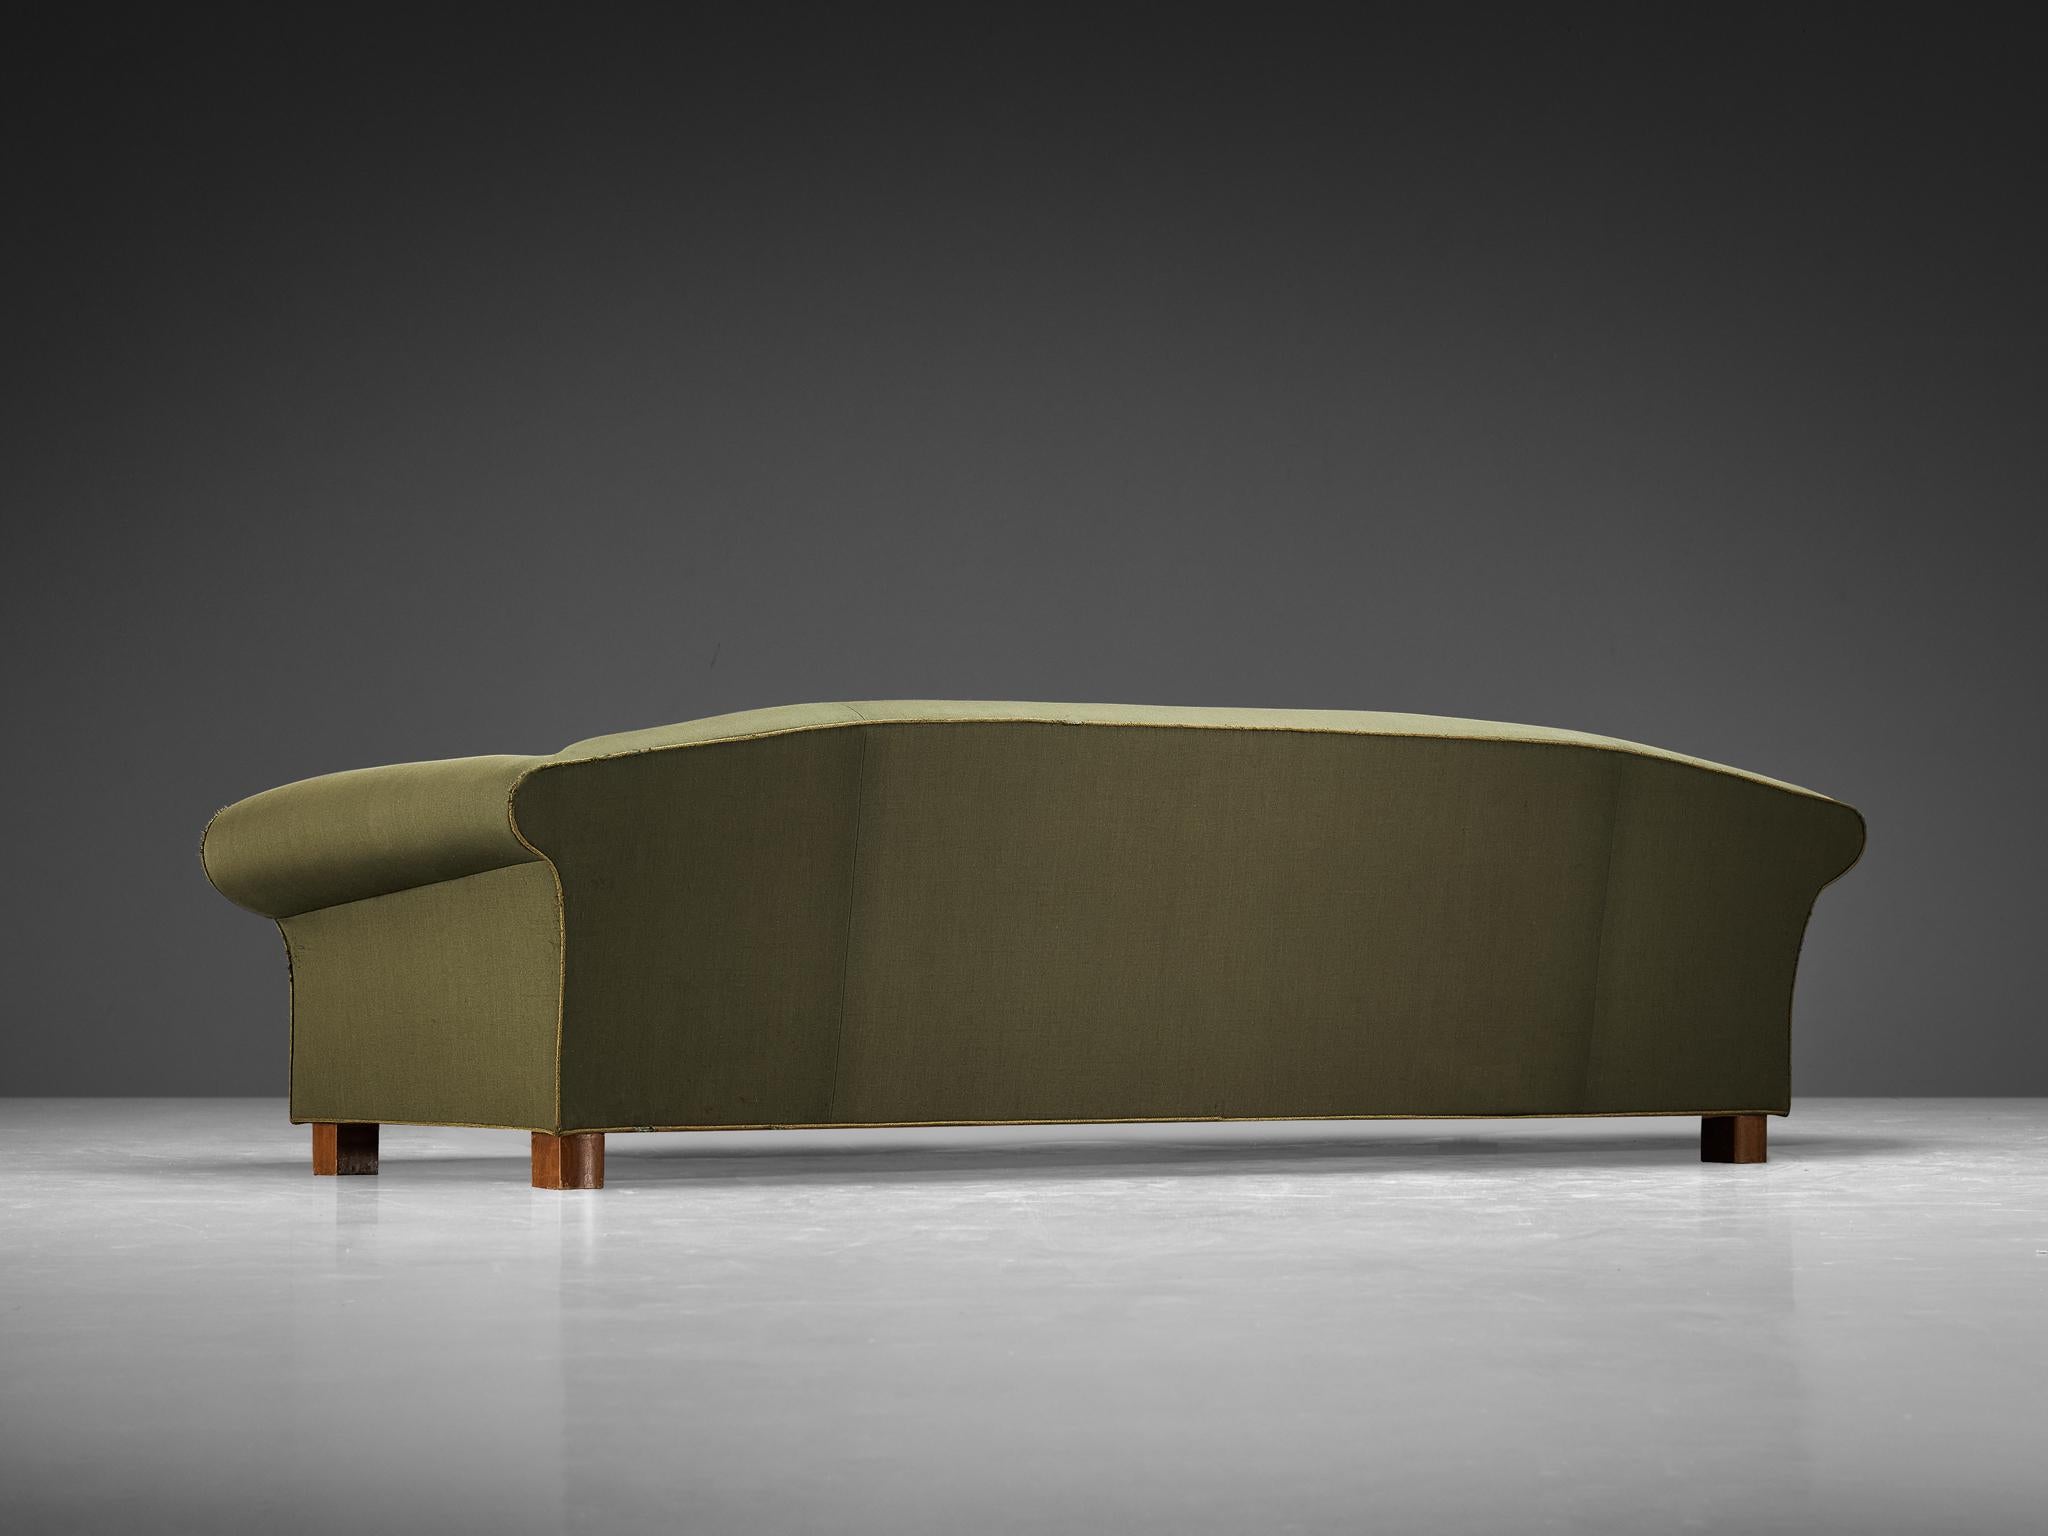 Swedish Art Deco Sofa in Olive Green Upholstery  For Sale 1